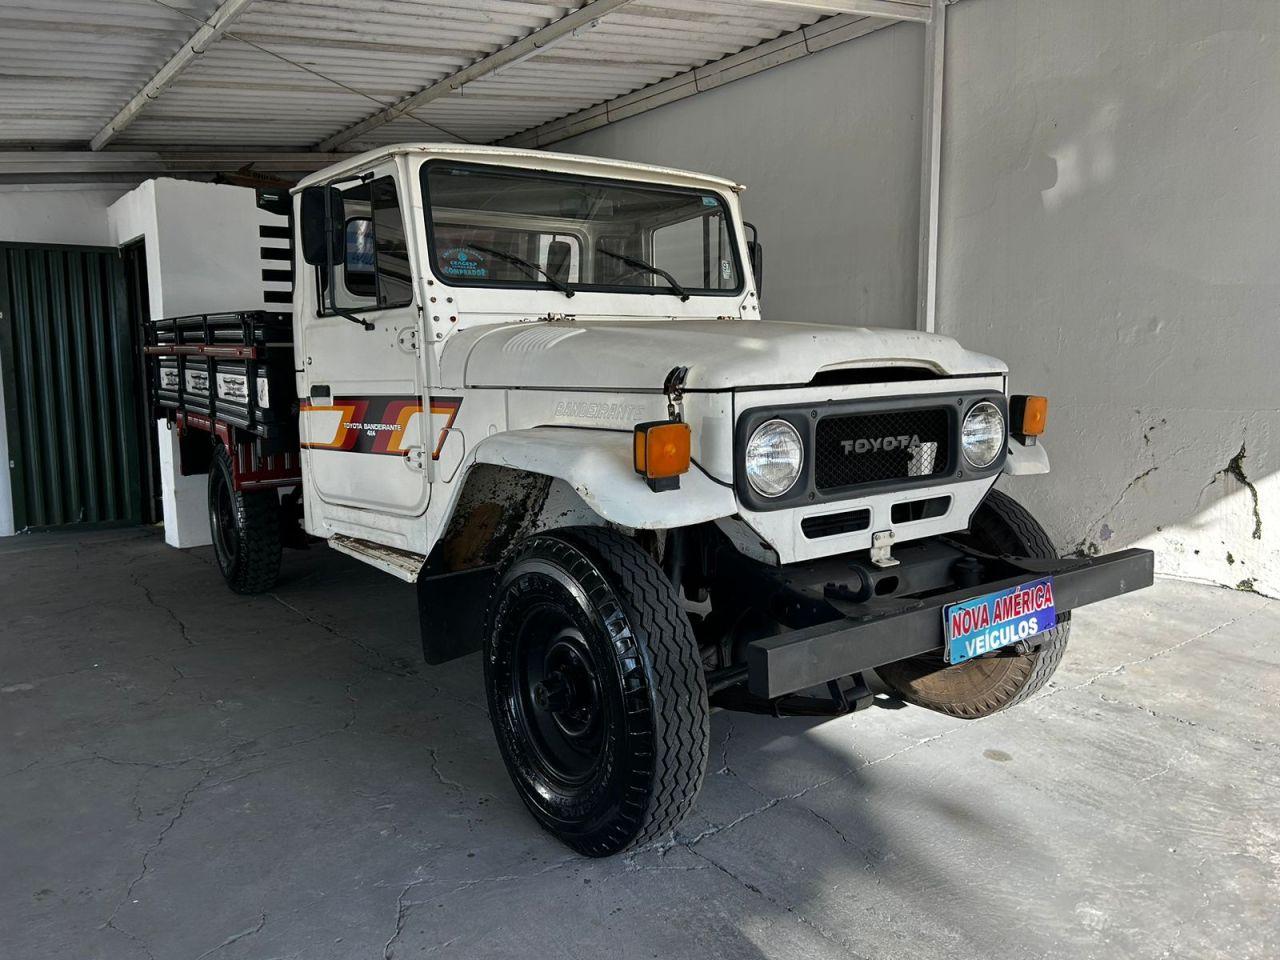 Toyota bandeirante Pick-up 3.7 4x4 Diesel Cabine Simples 1986